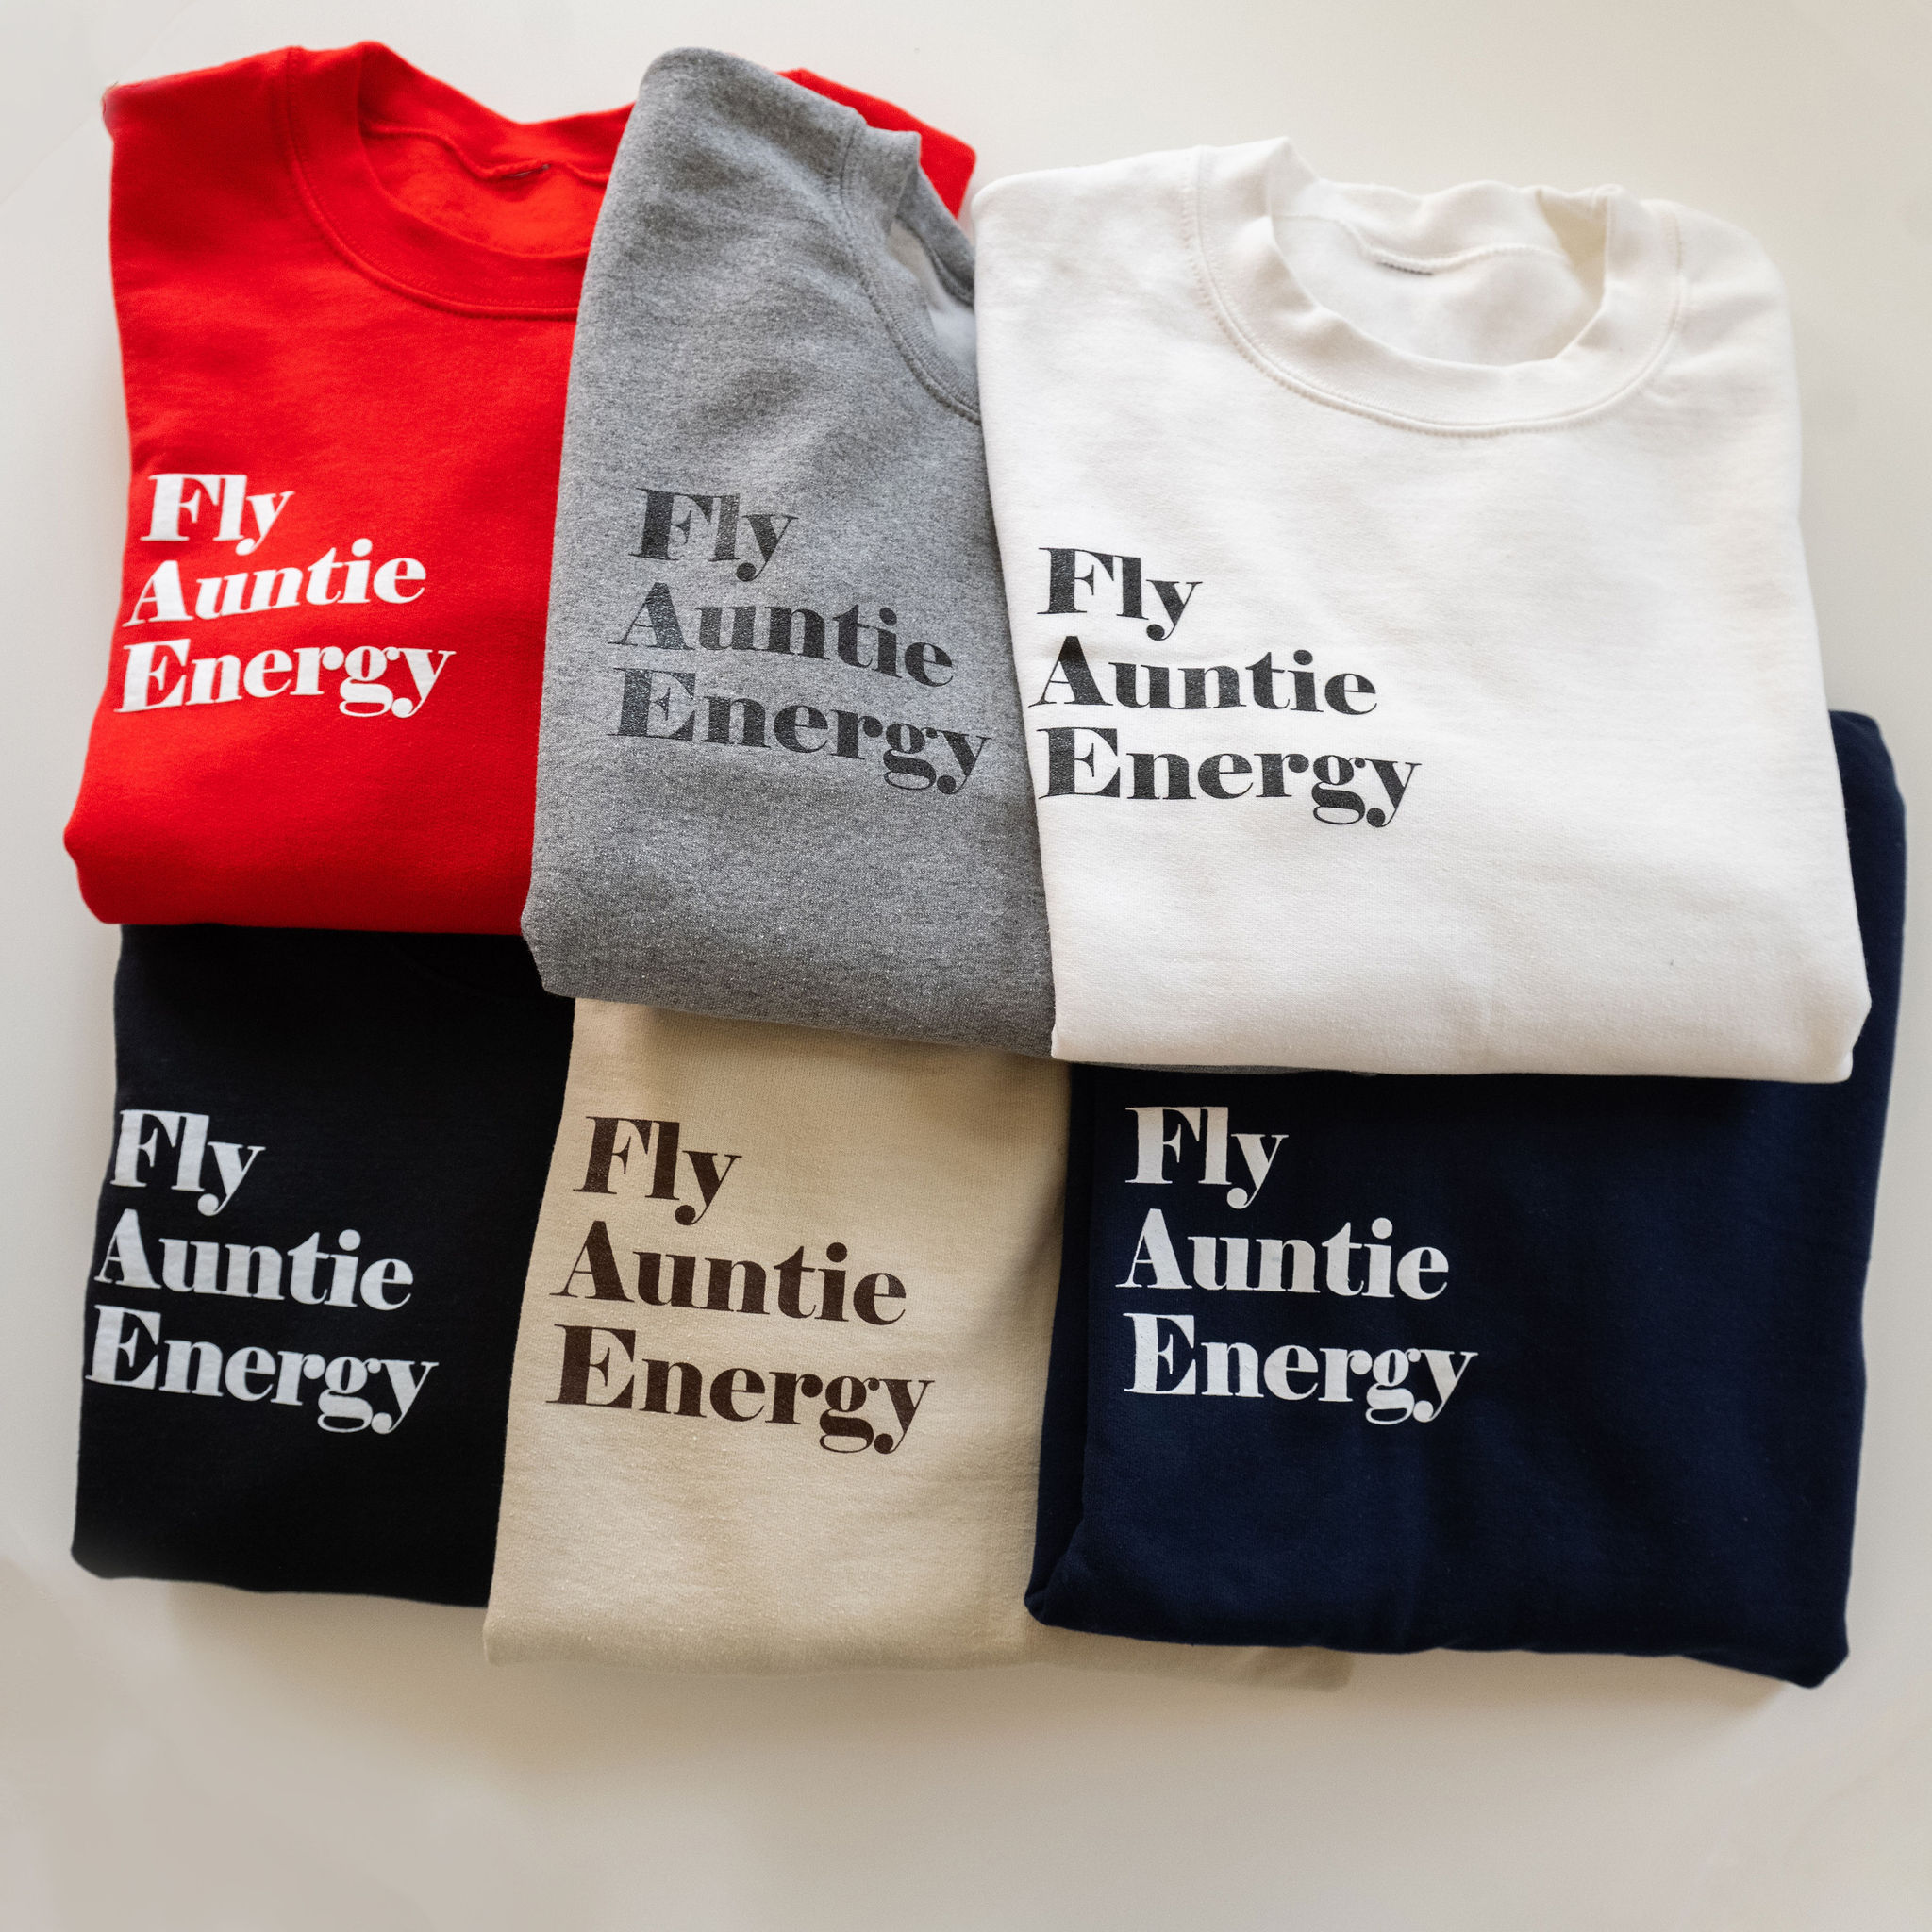 Fly Auntie Energy Apparel